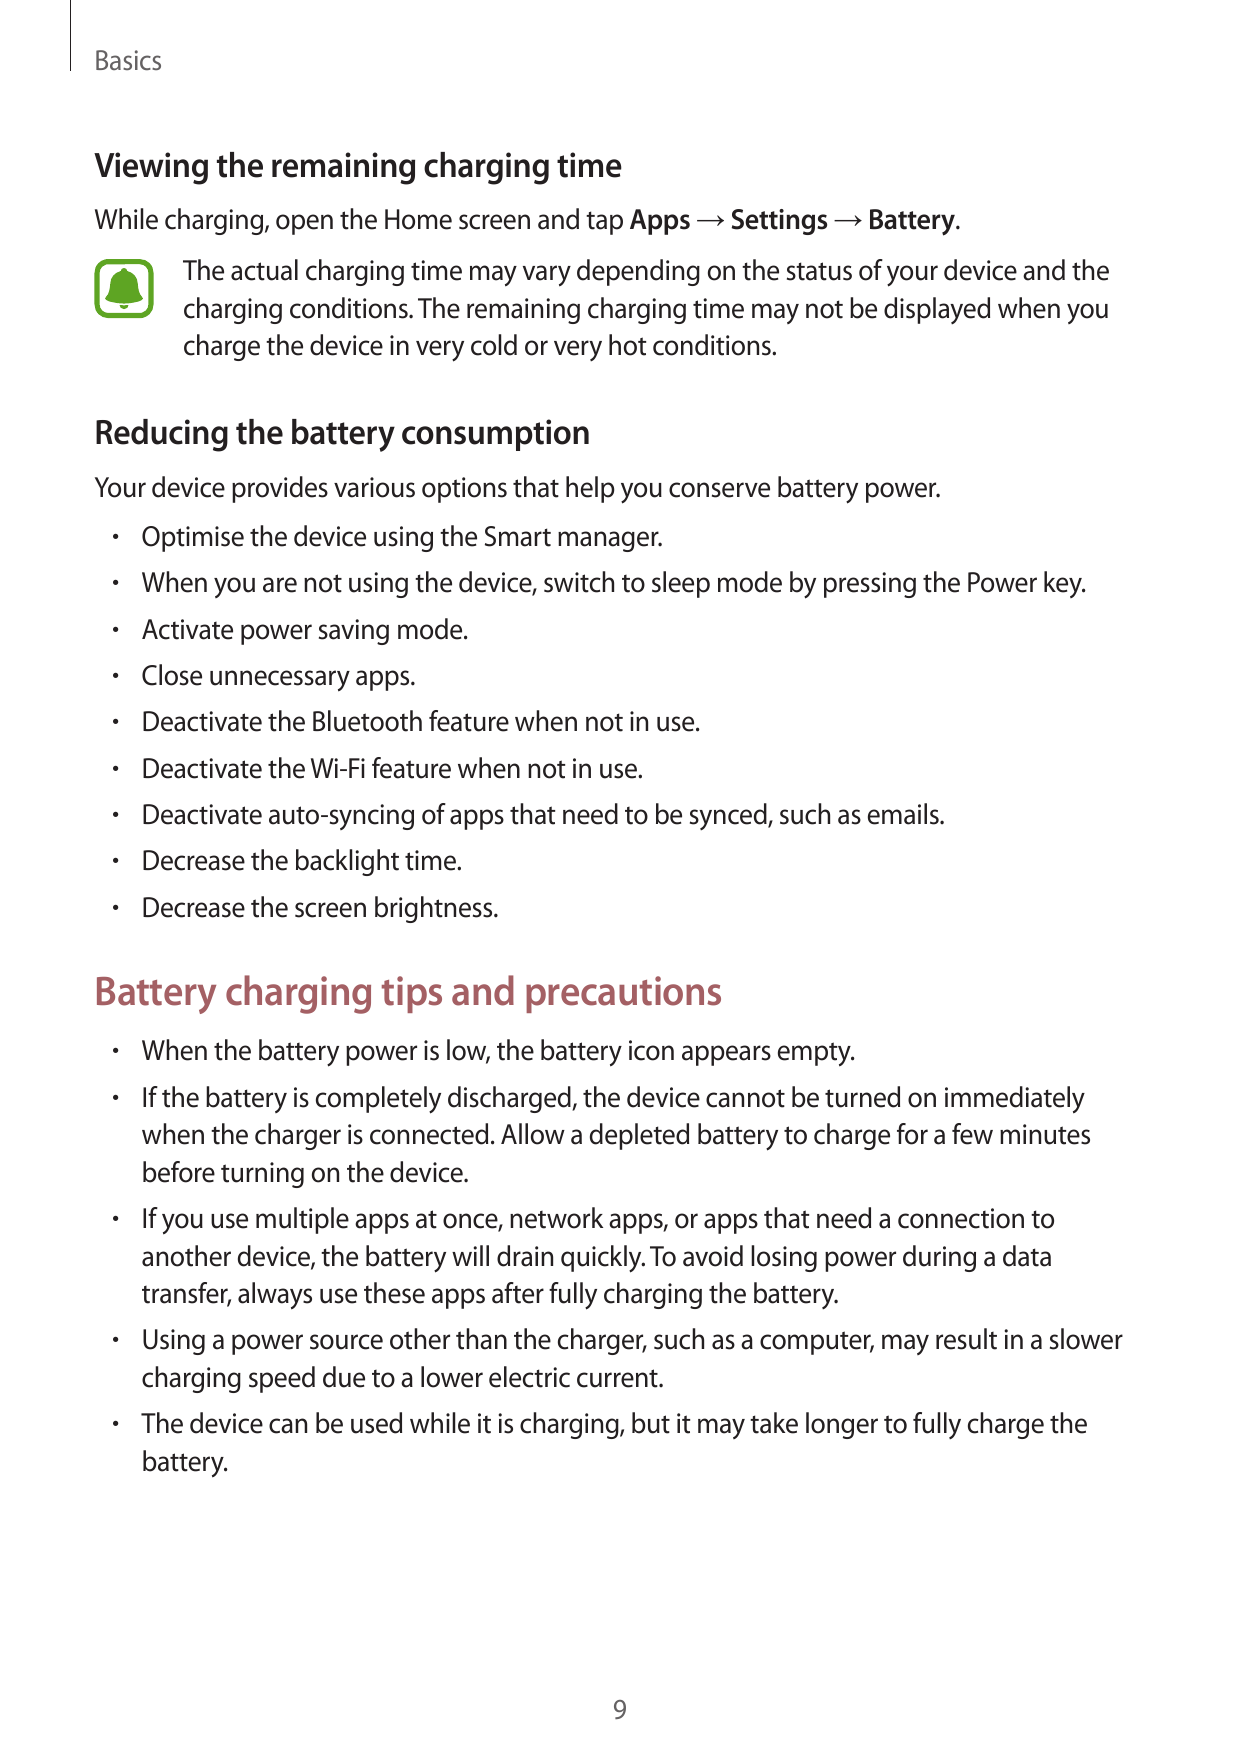 BasicsViewing the remaining charging timeWhile charging, open the Home screen and tap Apps → Settings → Battery.The actual charg